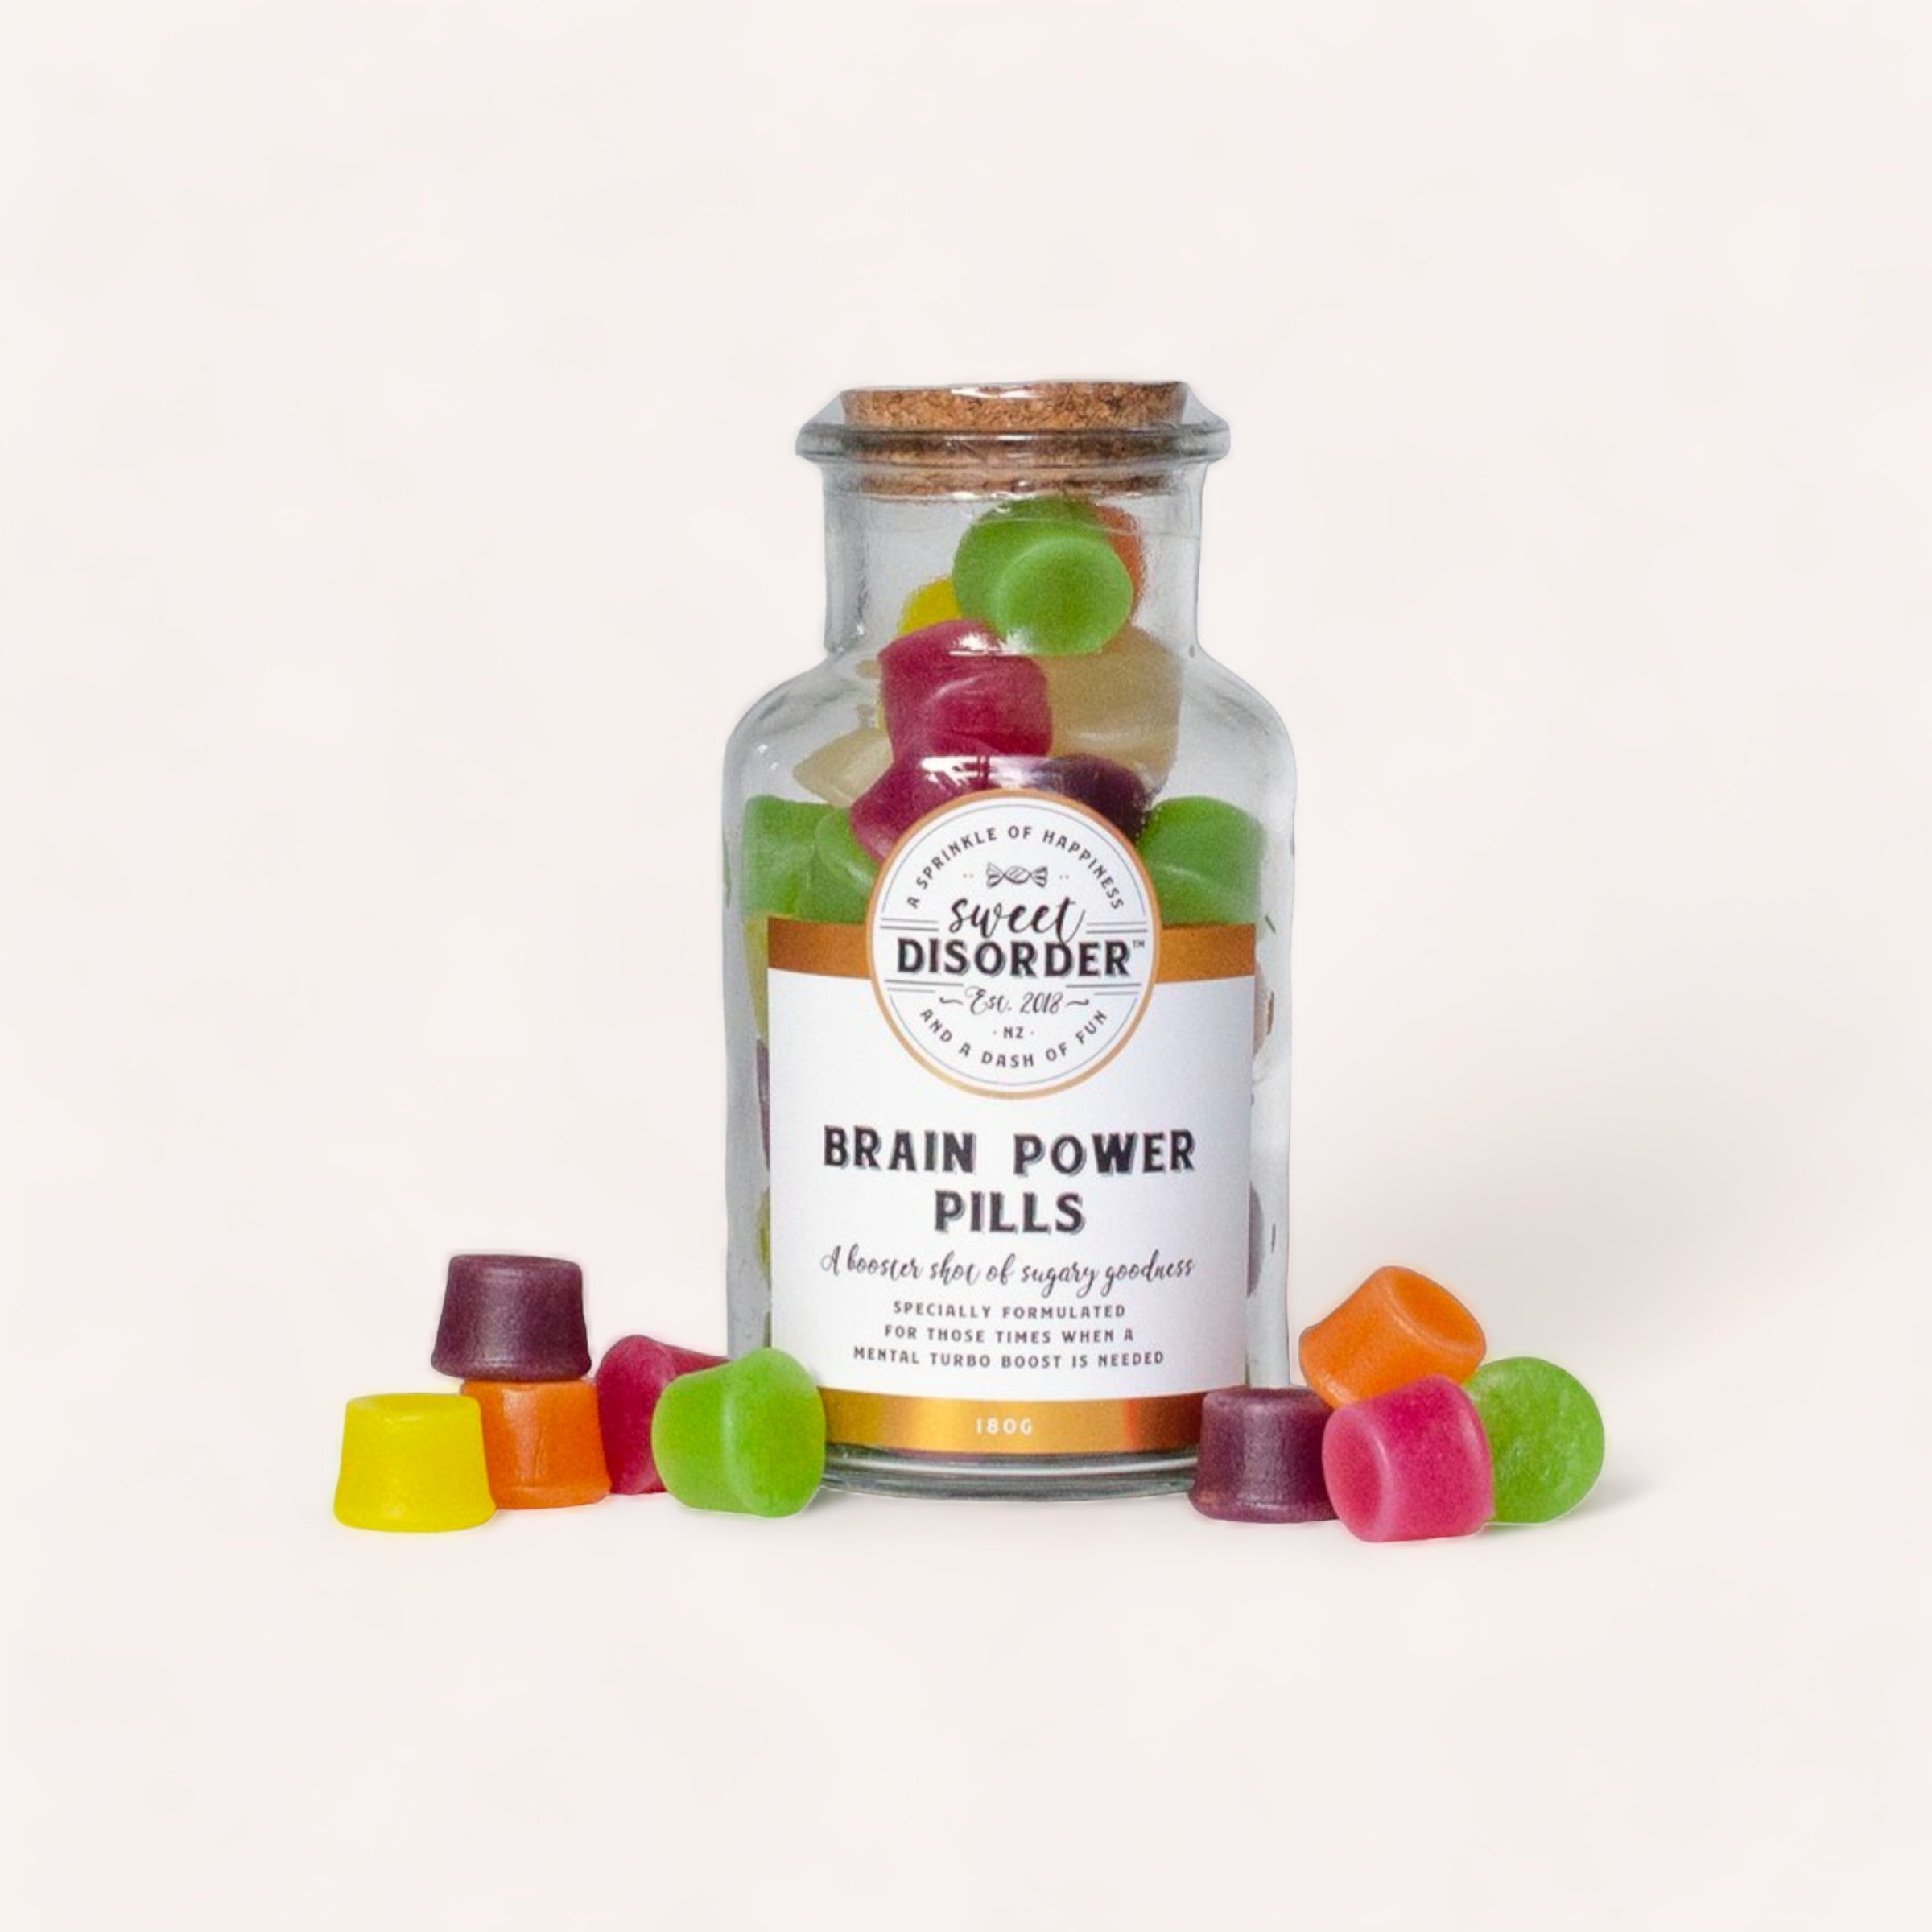 A whimsically labeled jar of Brain Power Pills Lollies by Sweet Disorder surrounded by colorful wine gums, suggesting a playful take on supplements.